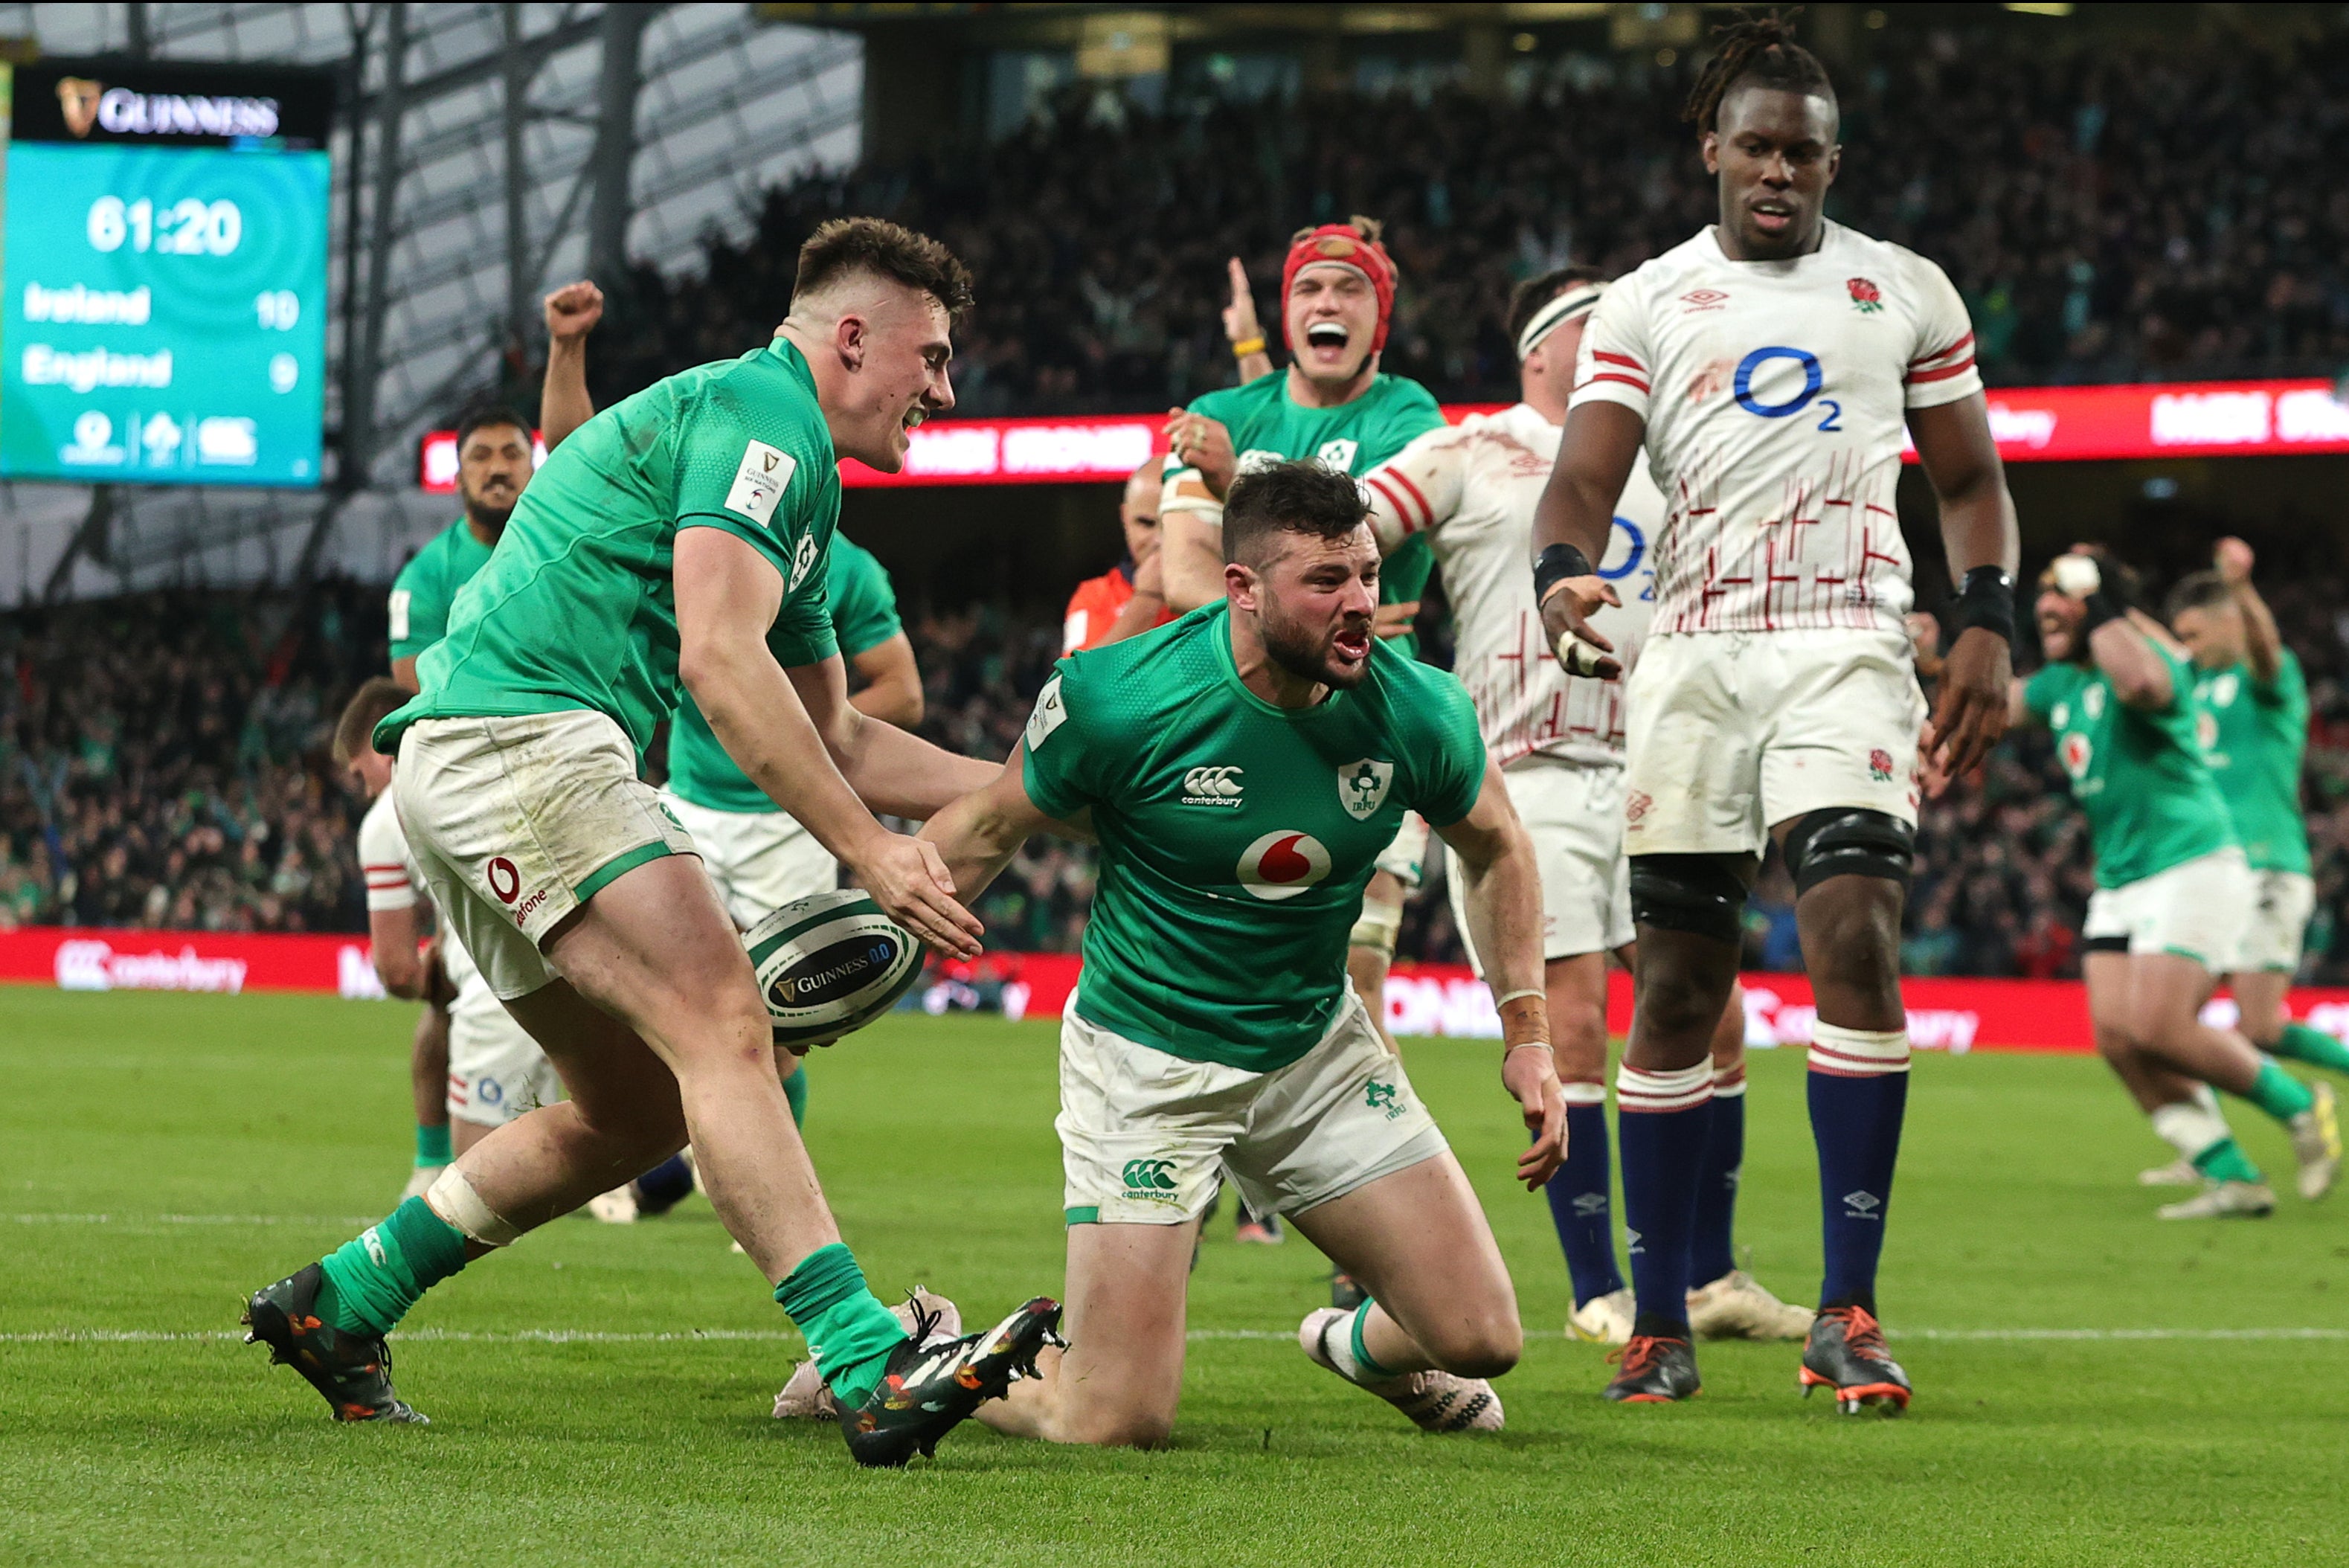 Ireland are seeking to become the first men’s team to win back-to-back Six Nations grand slams